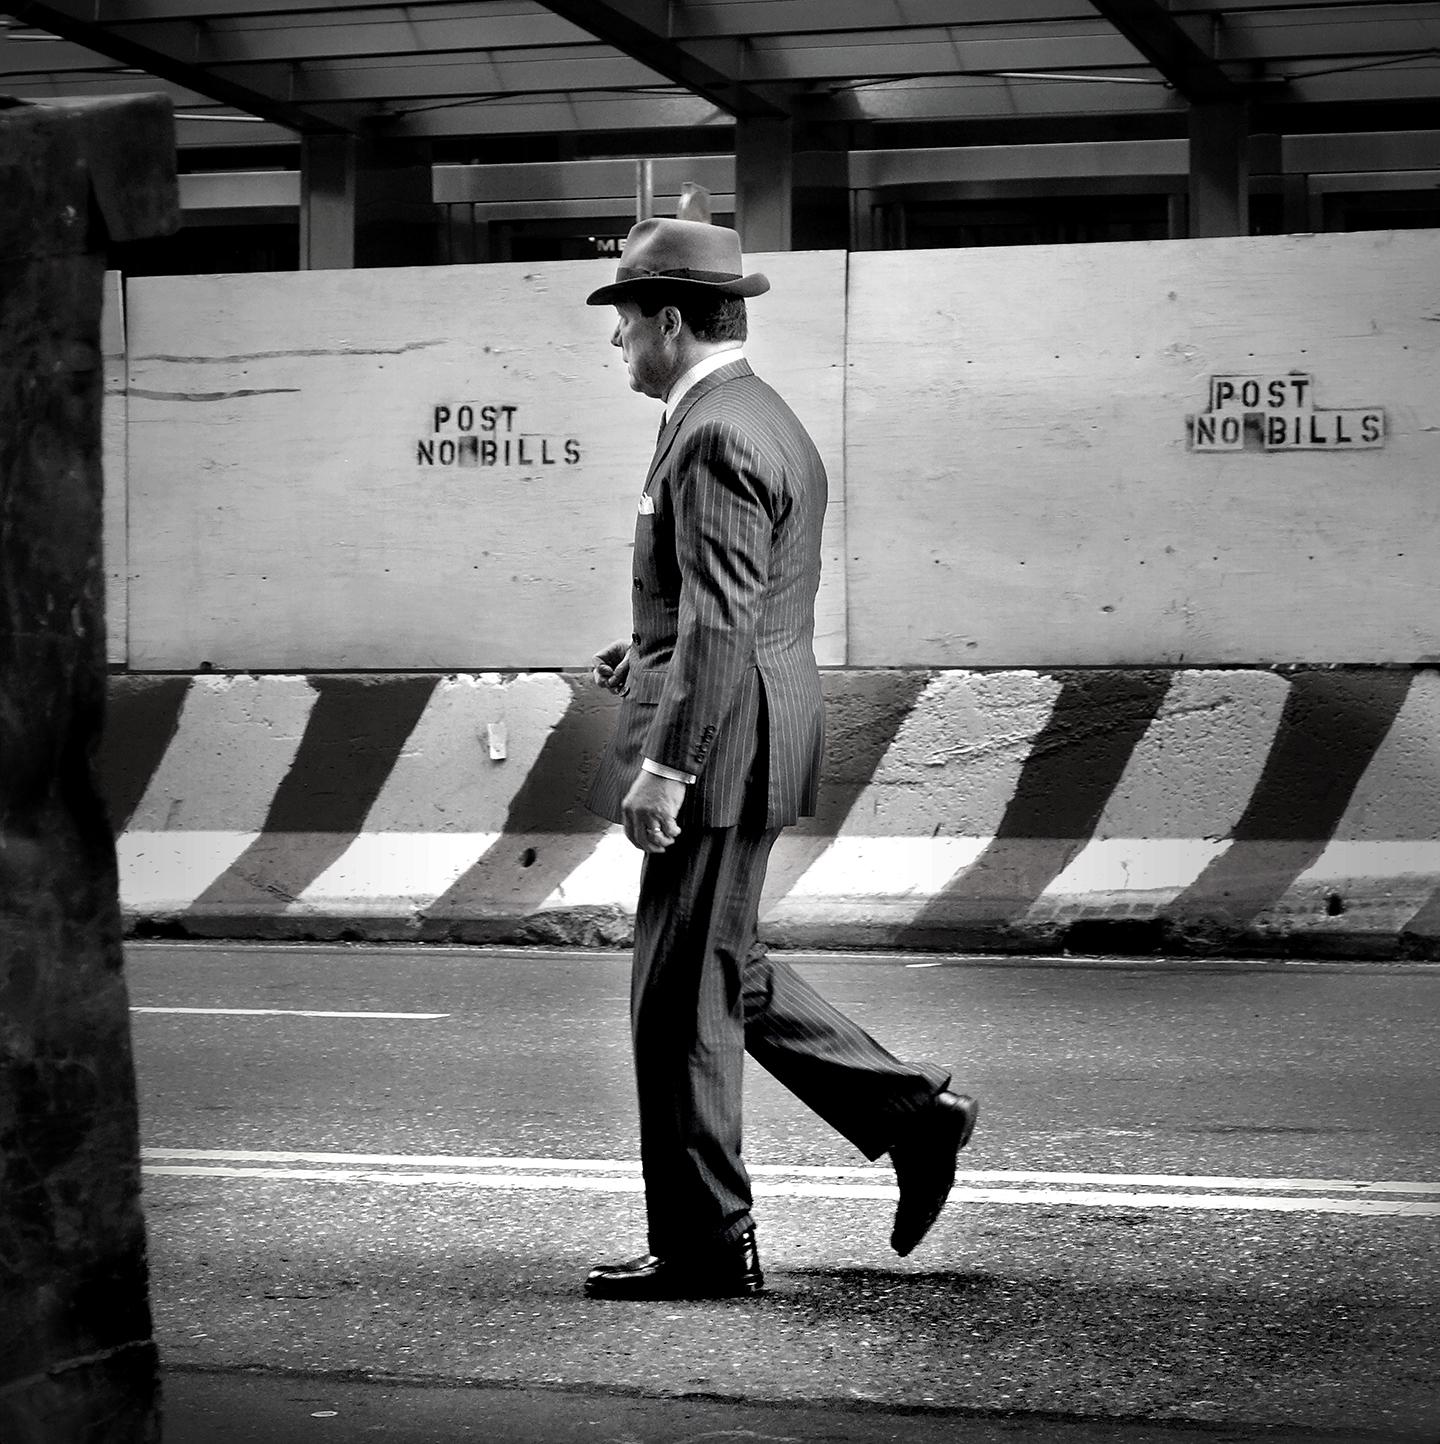 Artist: Sally Davies (1956)
Title: Midtown Man (New York City)
Year: 2022
Medium: Inkjet print on archival paper
Edition: 12, plus proofs
Size: 17 x 17 inches
Condition: Excellent
Inscription: Signed, dated, titled by the artist
Notes: This